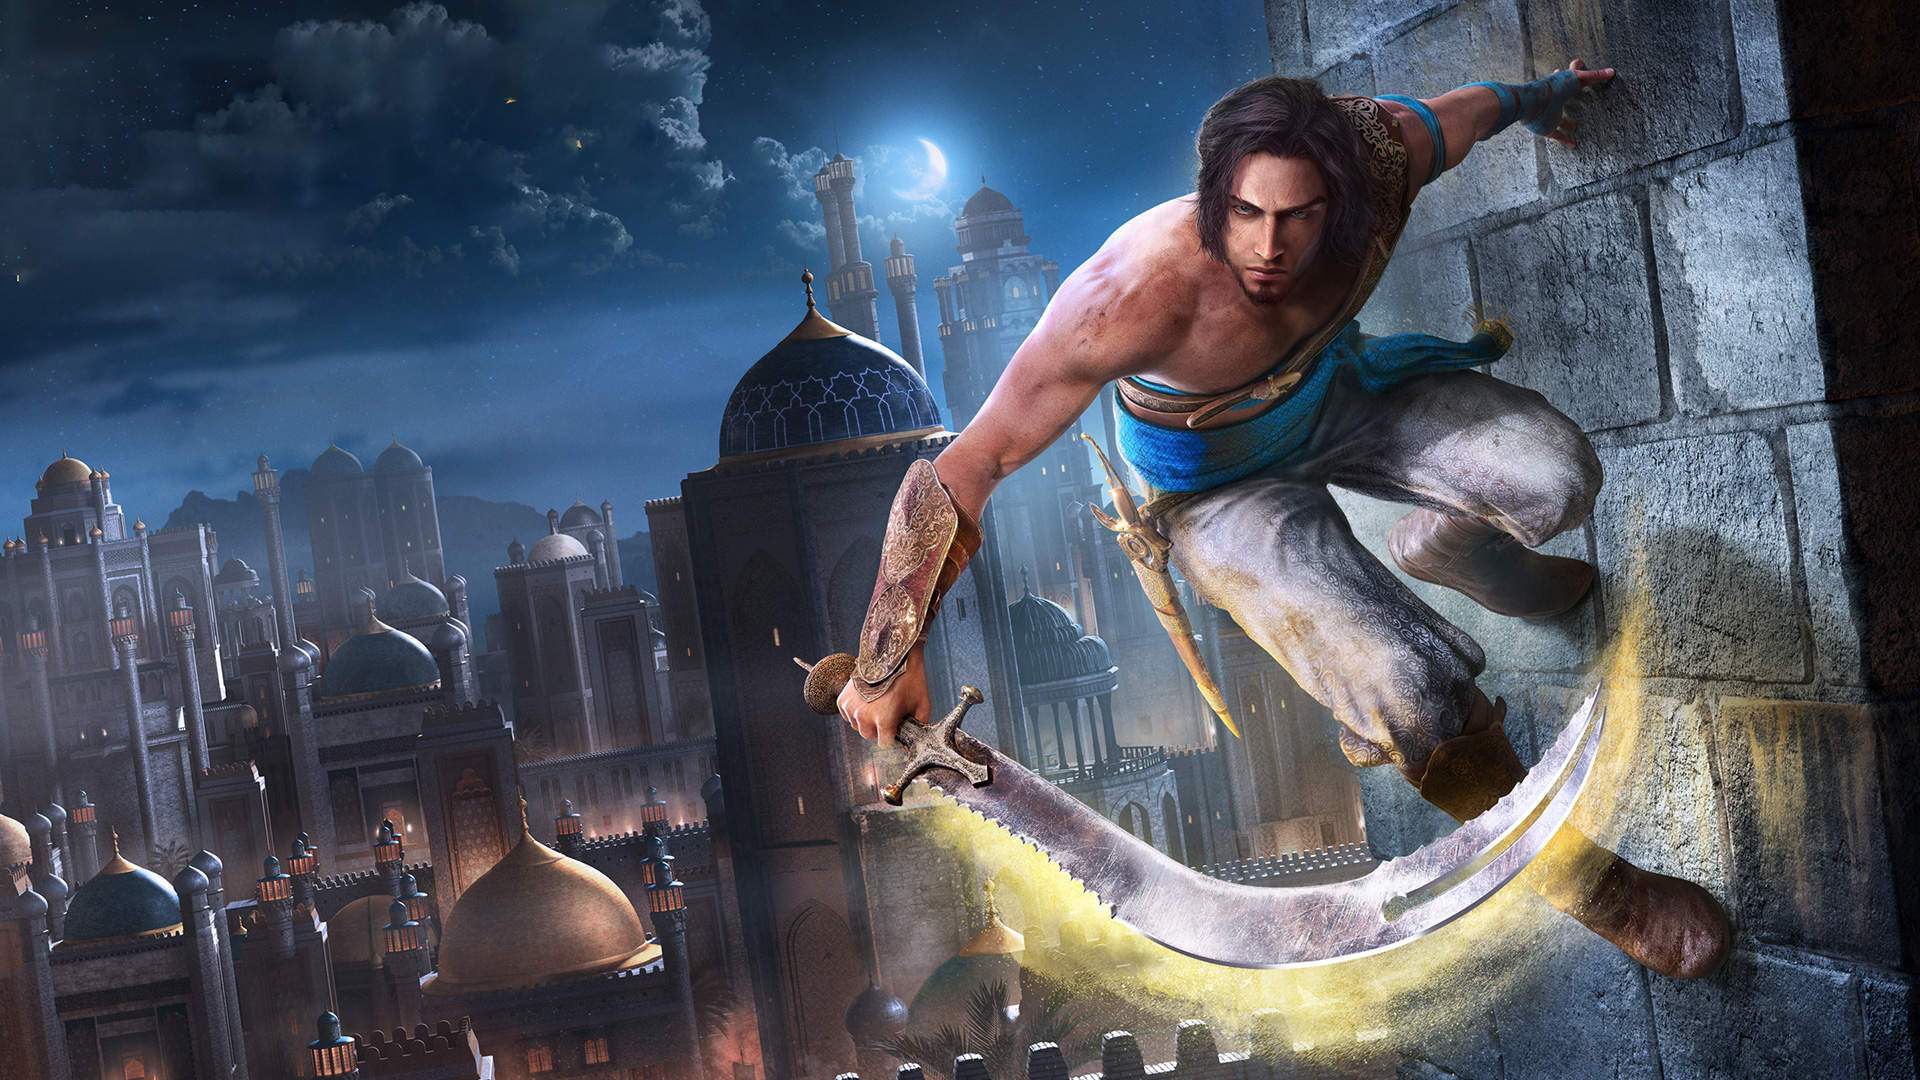 Prince of Persia: Sands of Time Remake appears to be coming to Switch at a later date